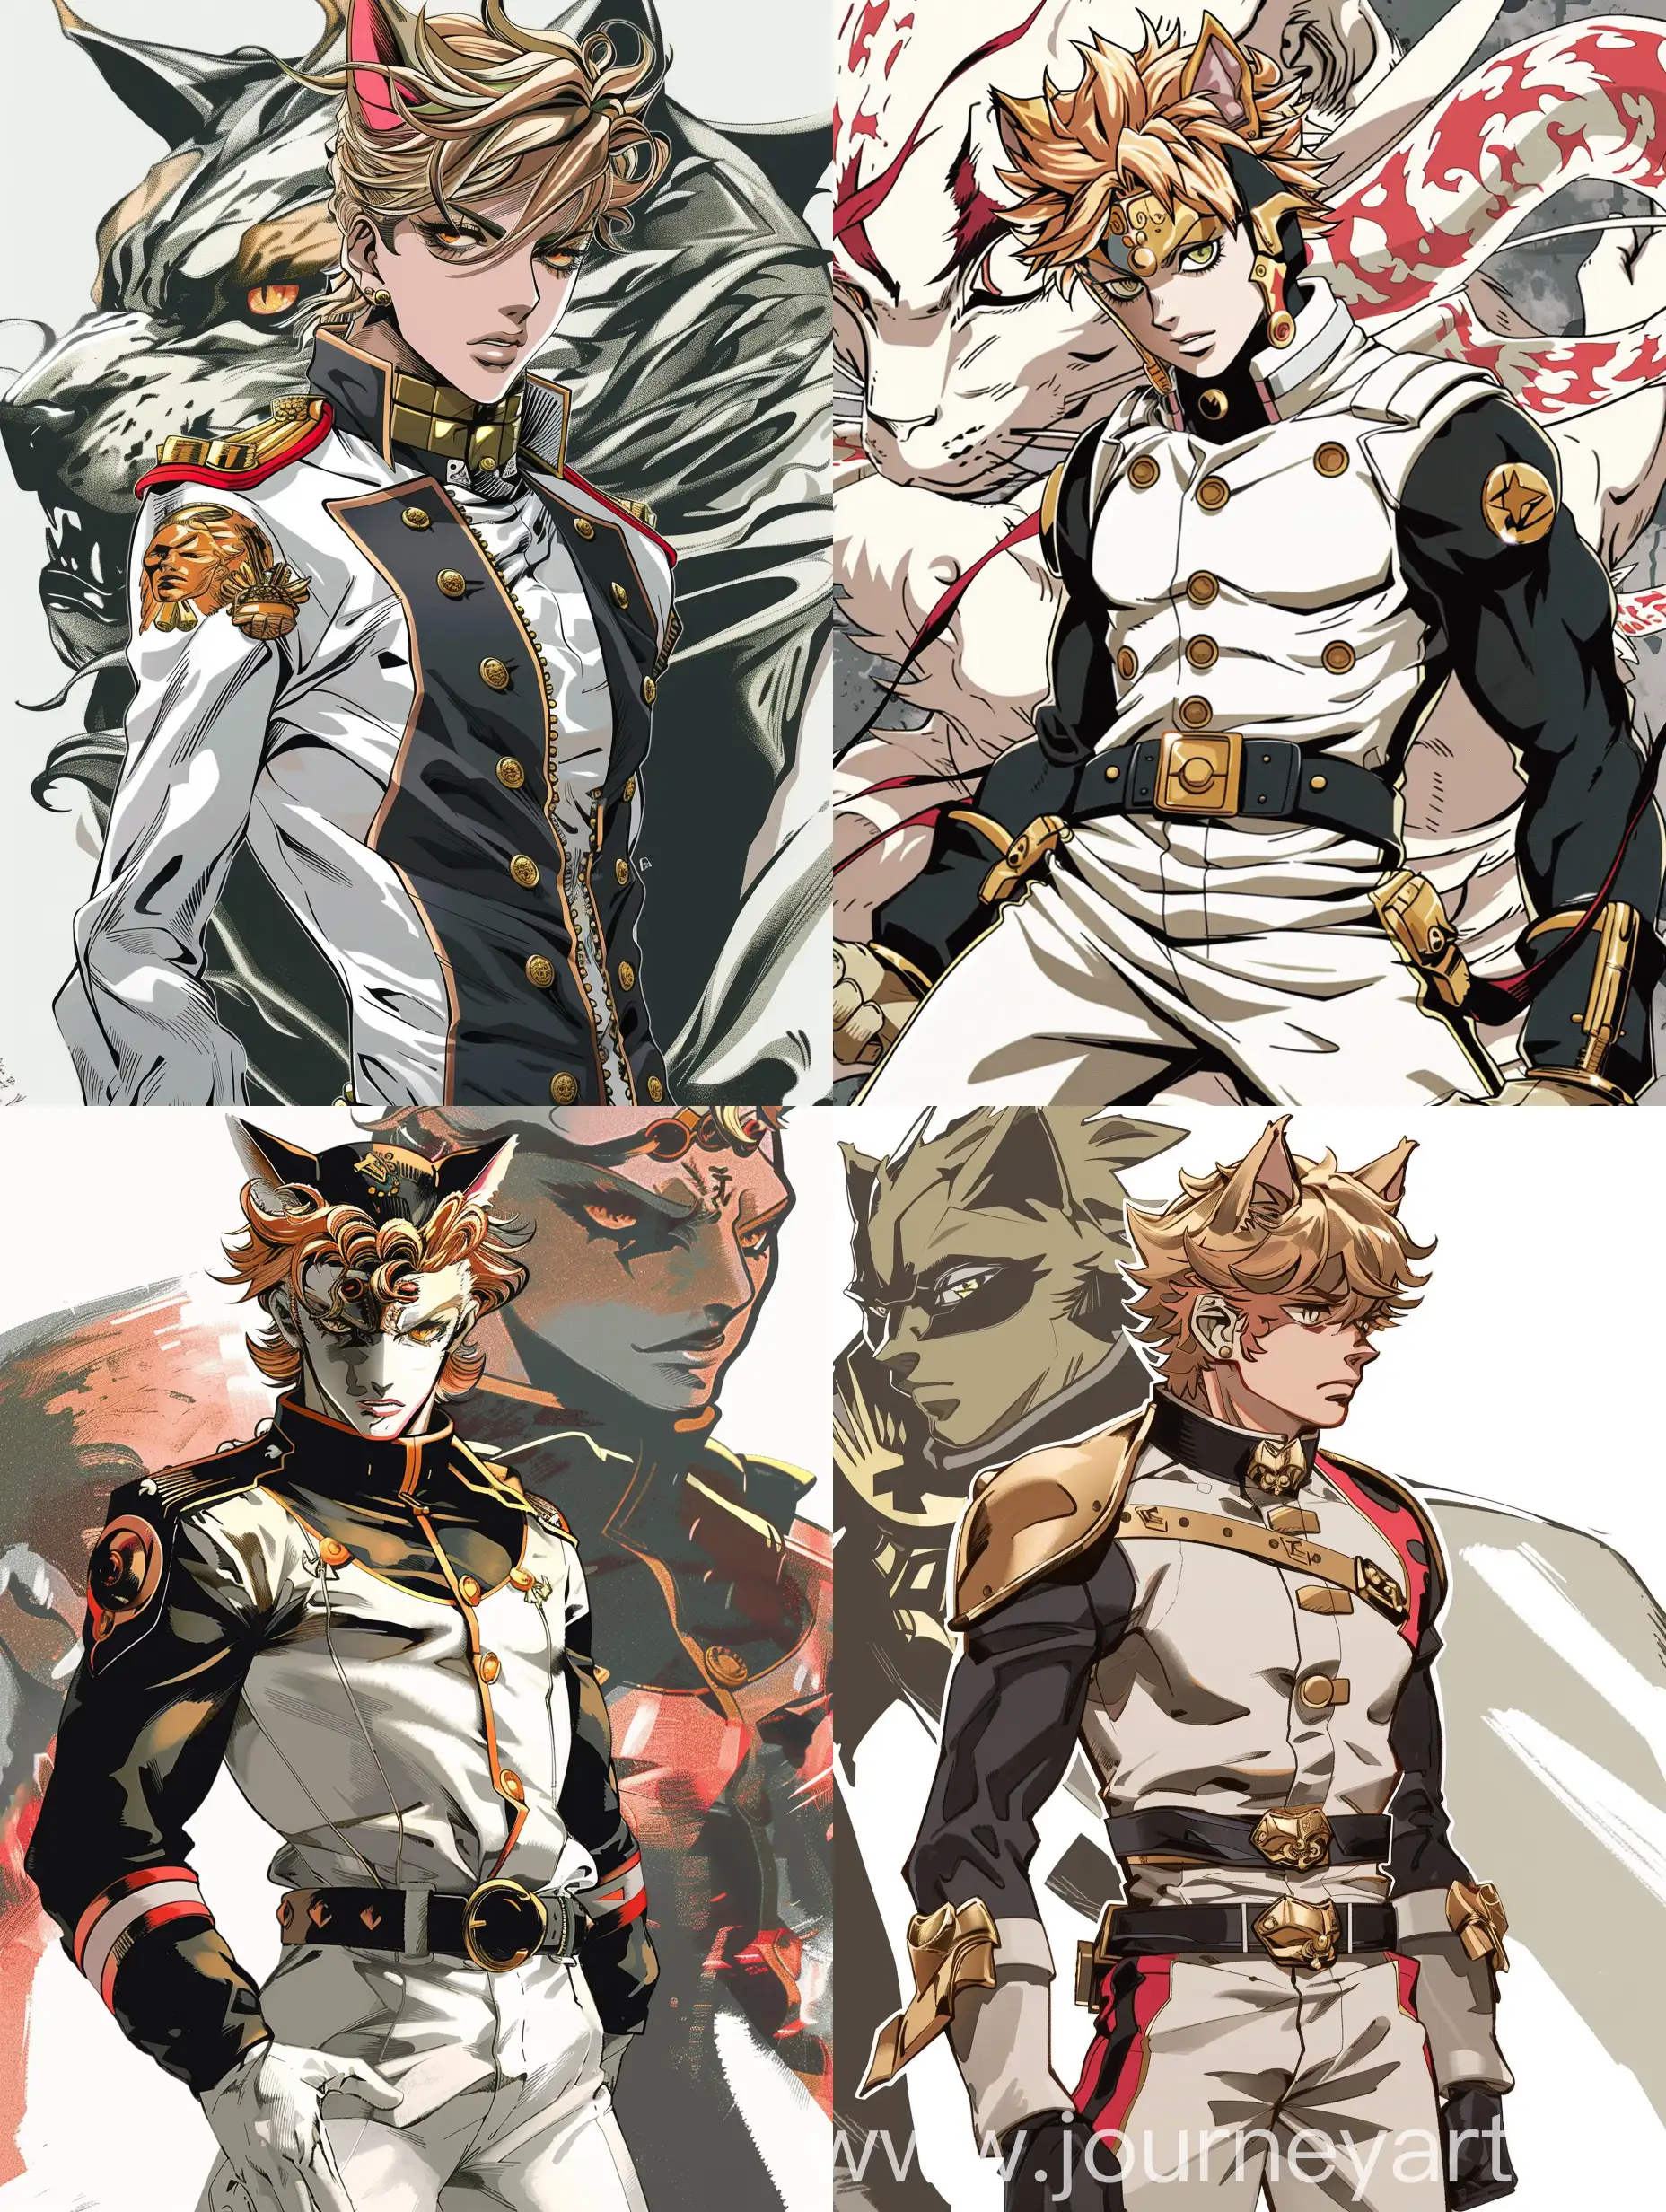 A character in the Jojo's Bizarre Adventures style, depicting a catboy with light brown hair, cat ears, and golden eyes. The character wears a detailed military-style white and black uniform with red and gold accents. The character's pose is dynamic, with bold lines, dramatic shading, and expressive facial features typical of Jojo's Bizarre Adventures. Behind the character is a Stand, resembling Star Platinum, but with a similar appearance to the character in a reversible color palette and slightly more muscular with a bare torso. The background is minimalistic to emphasize the characters, and the image is highly detailed and vibrant.